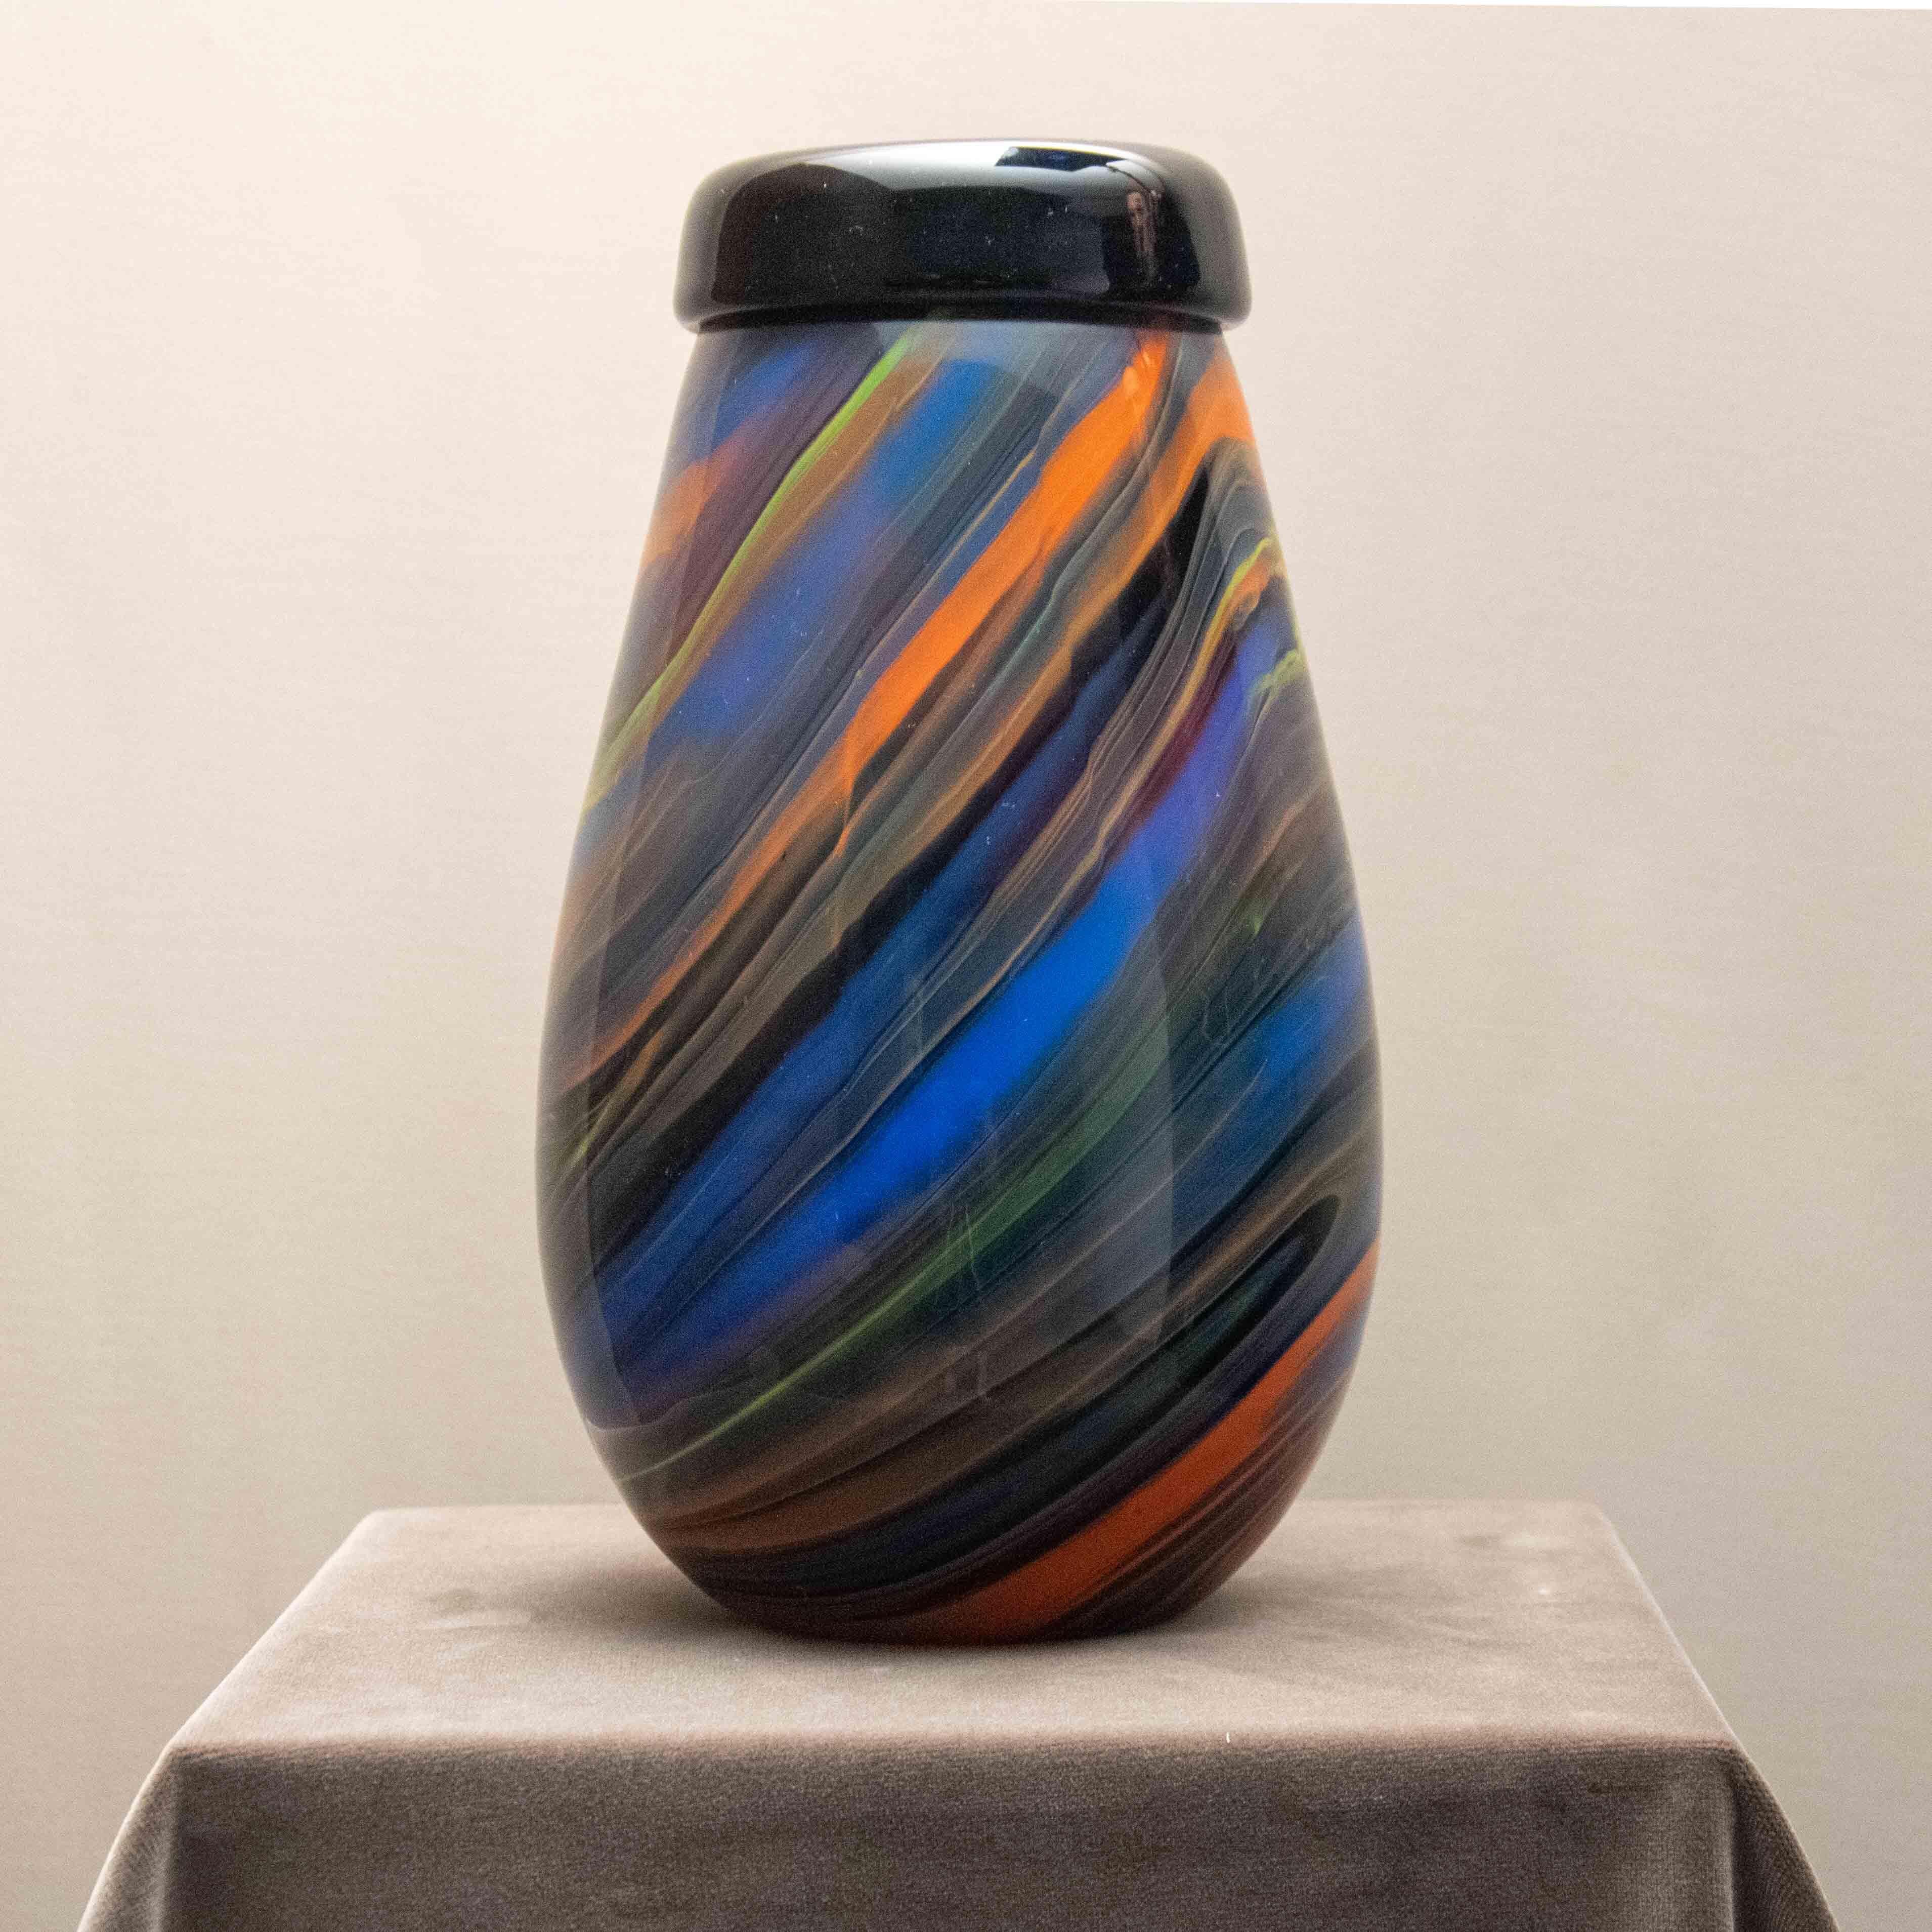 Large modern Murano black and colored glass with polychromatic marble vase.
It has made by Arte Vetro Murano for Missoni
Limited edition of 300 copies. This is no. 268/300.
 Engraved name and numbering on the base: Missoni by Arte Vetro Murano Cod